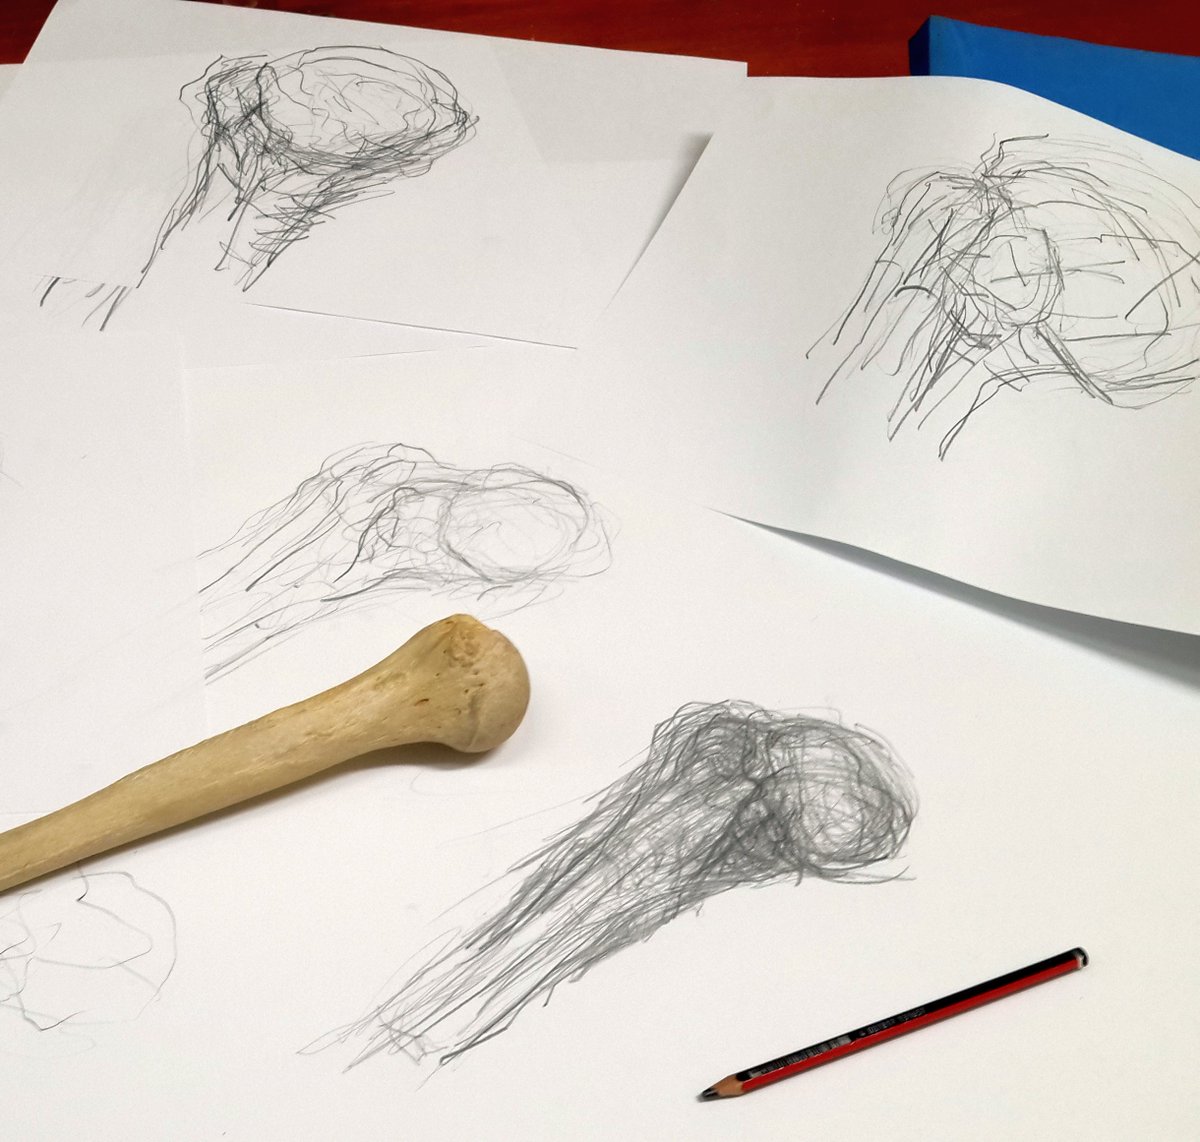 Iain Keenan On Twitter Observational Drawing Workshop For - 